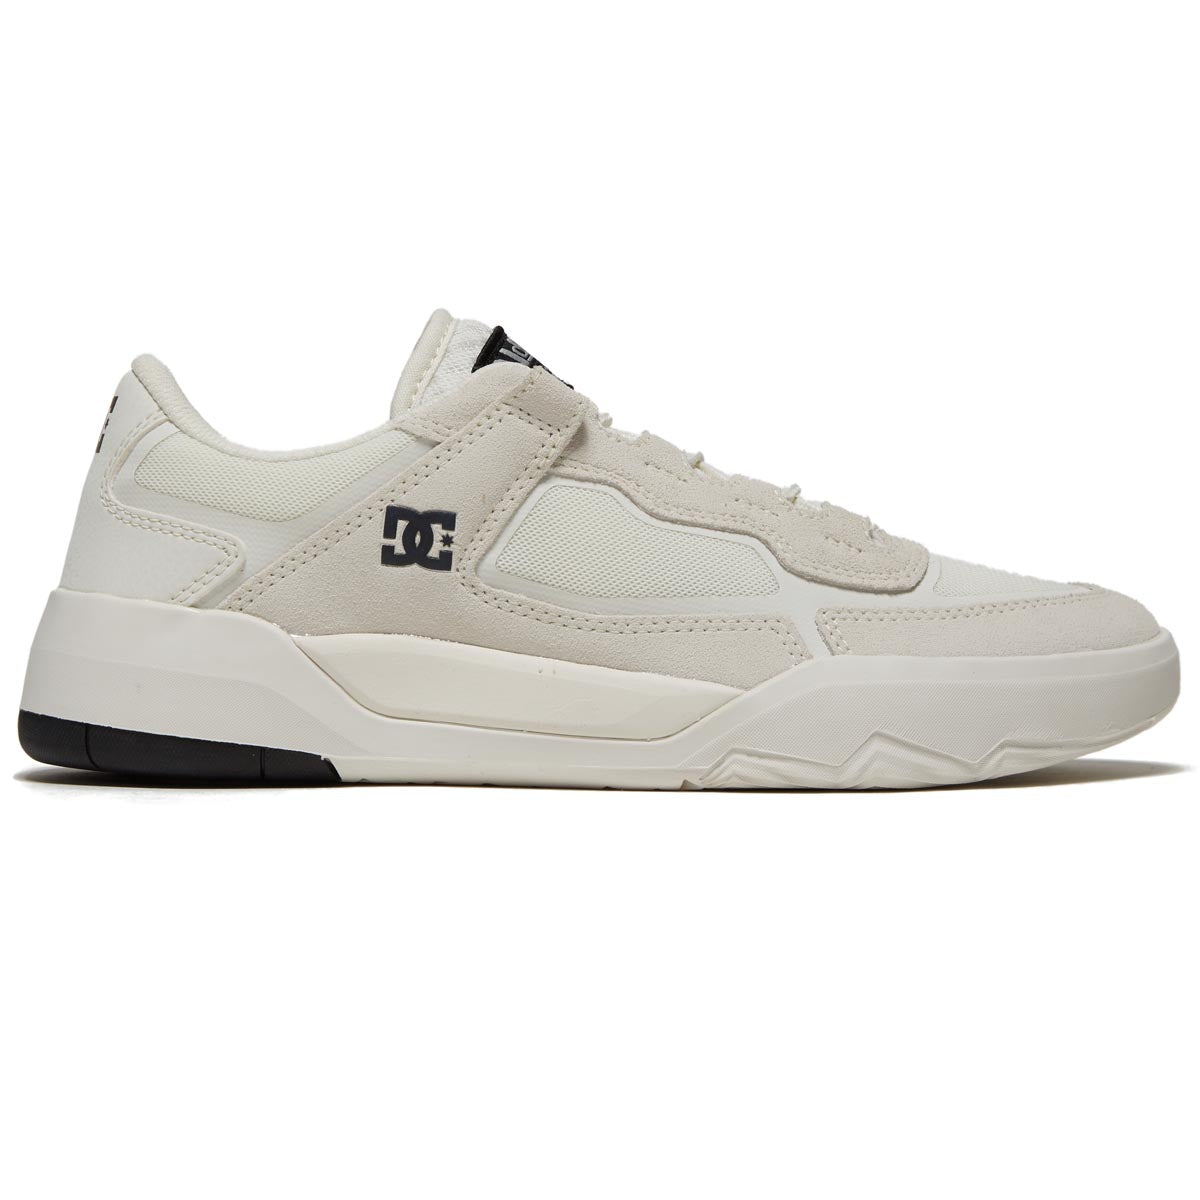 DC Metric Shoes - Off White image 1